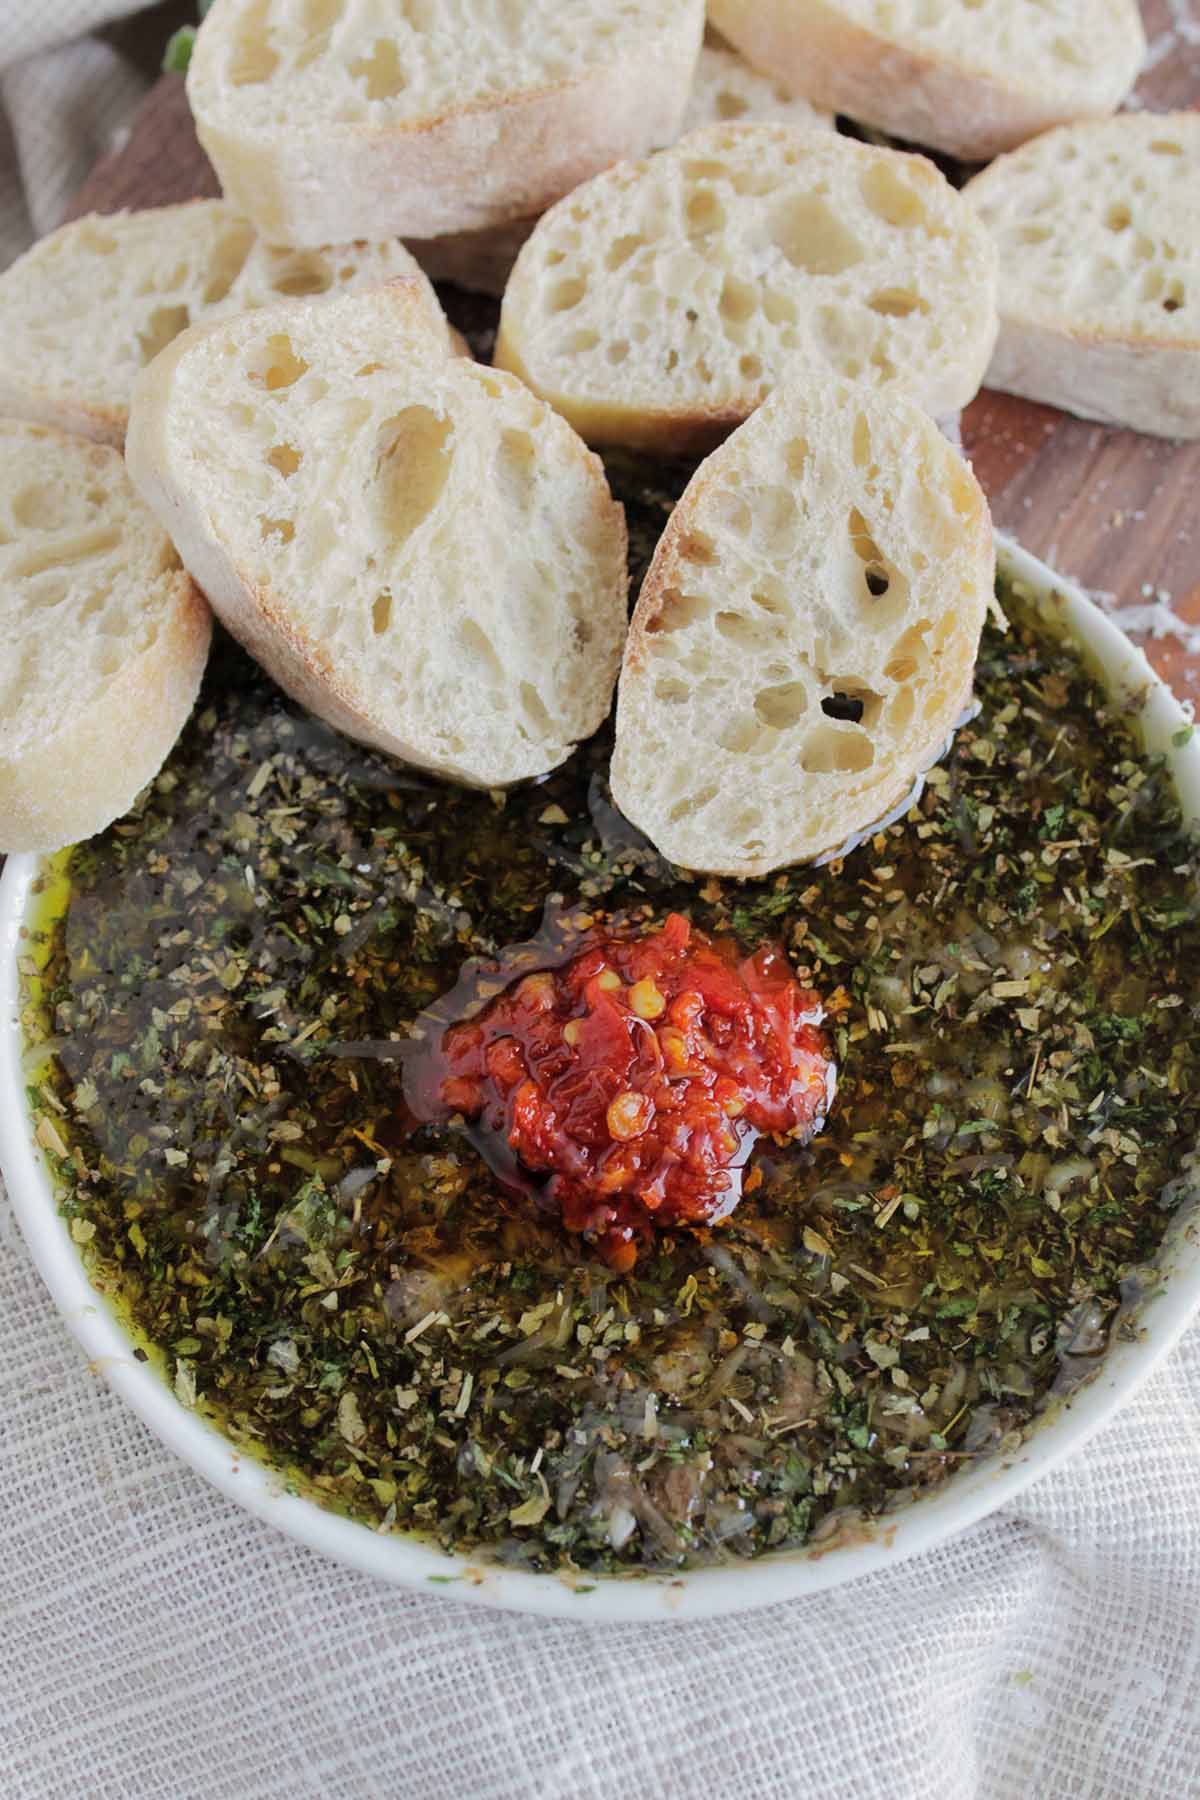 French bread dipped into olive oil herbed dip.